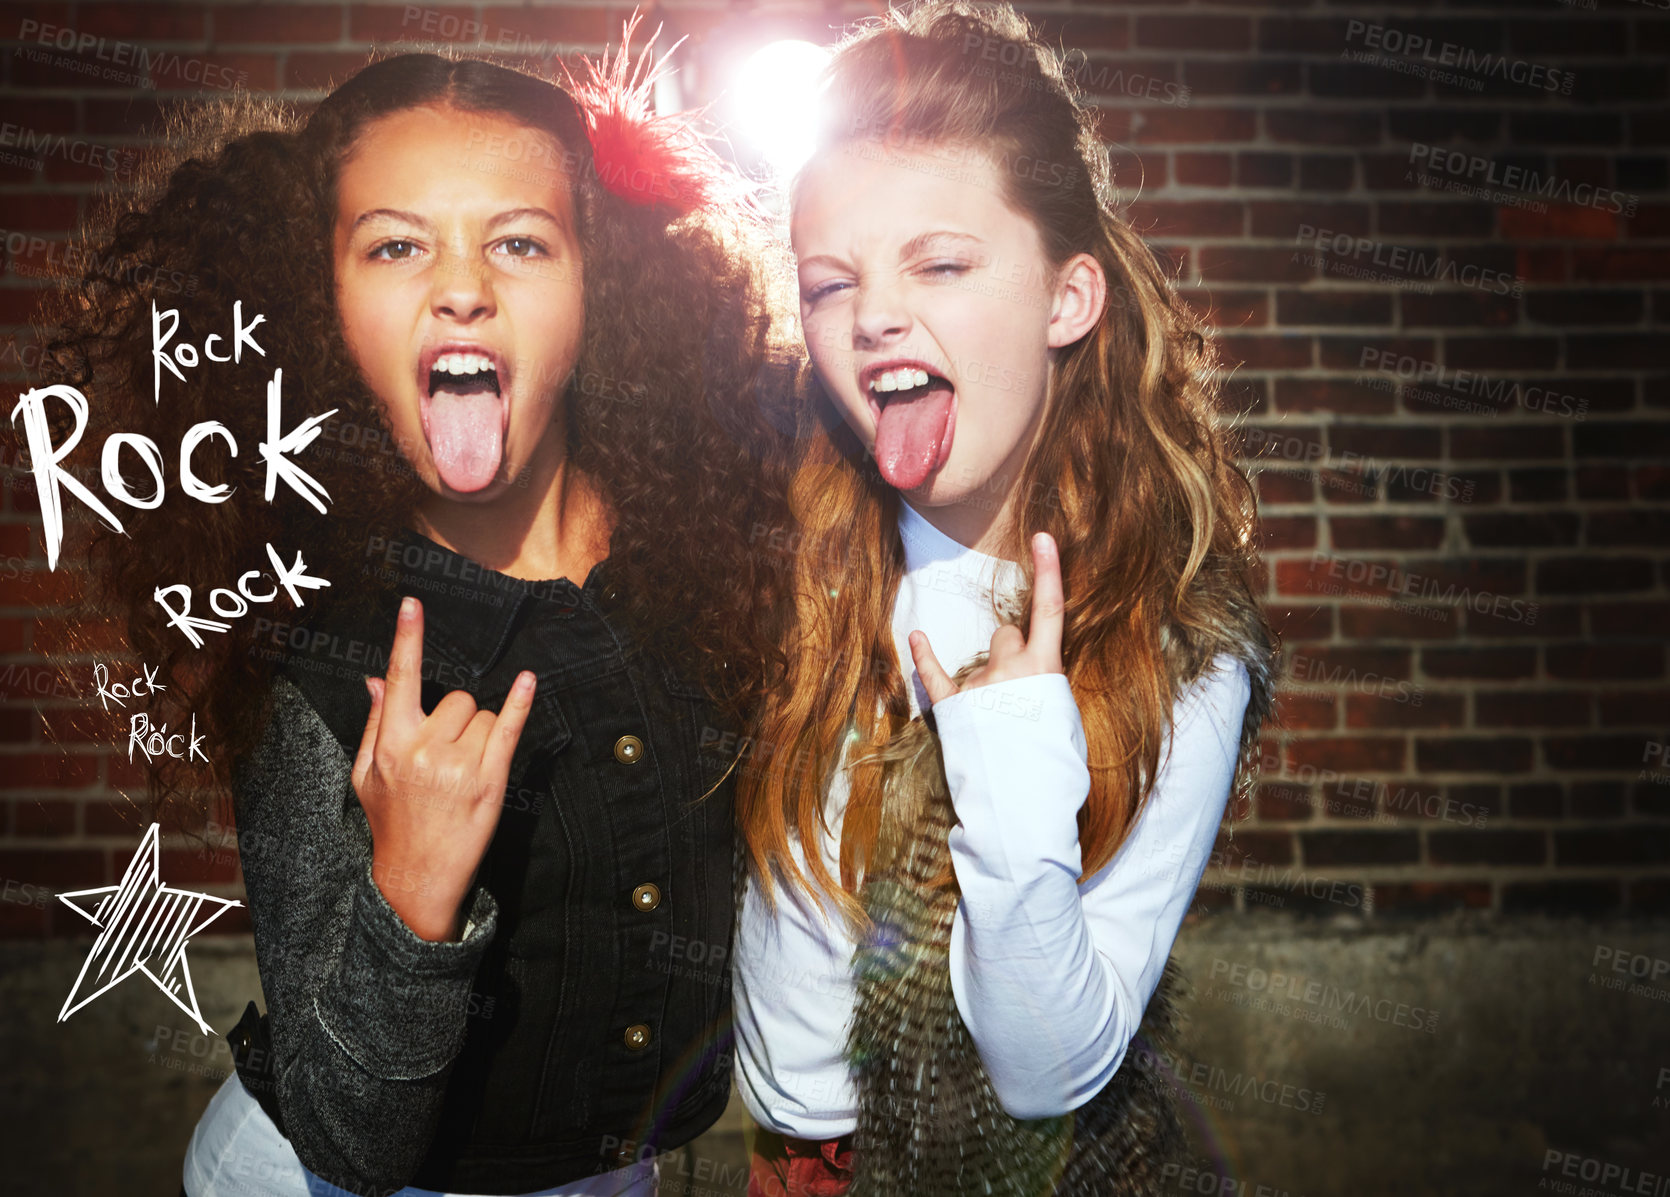 Buy stock photo Shot of two girls pulling faces and making a rock gesture